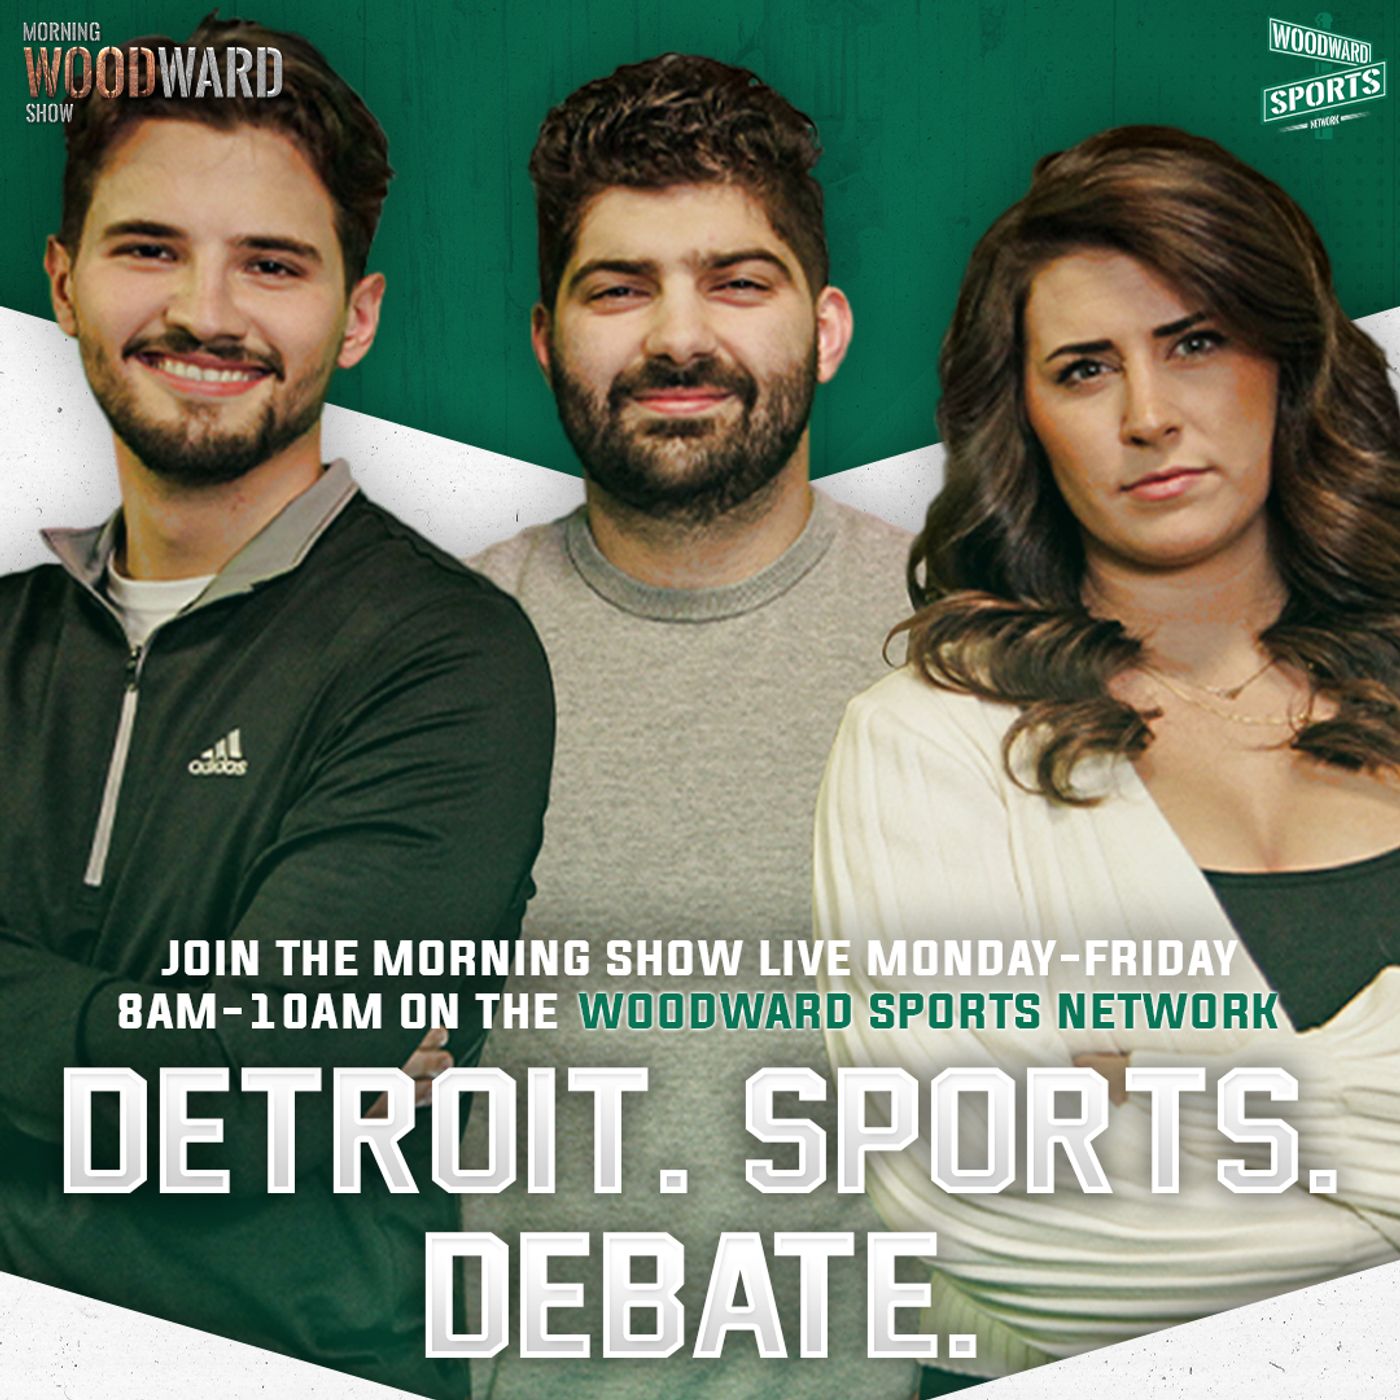 Morning Woodward Show | Wednesday, April 20th, 2022